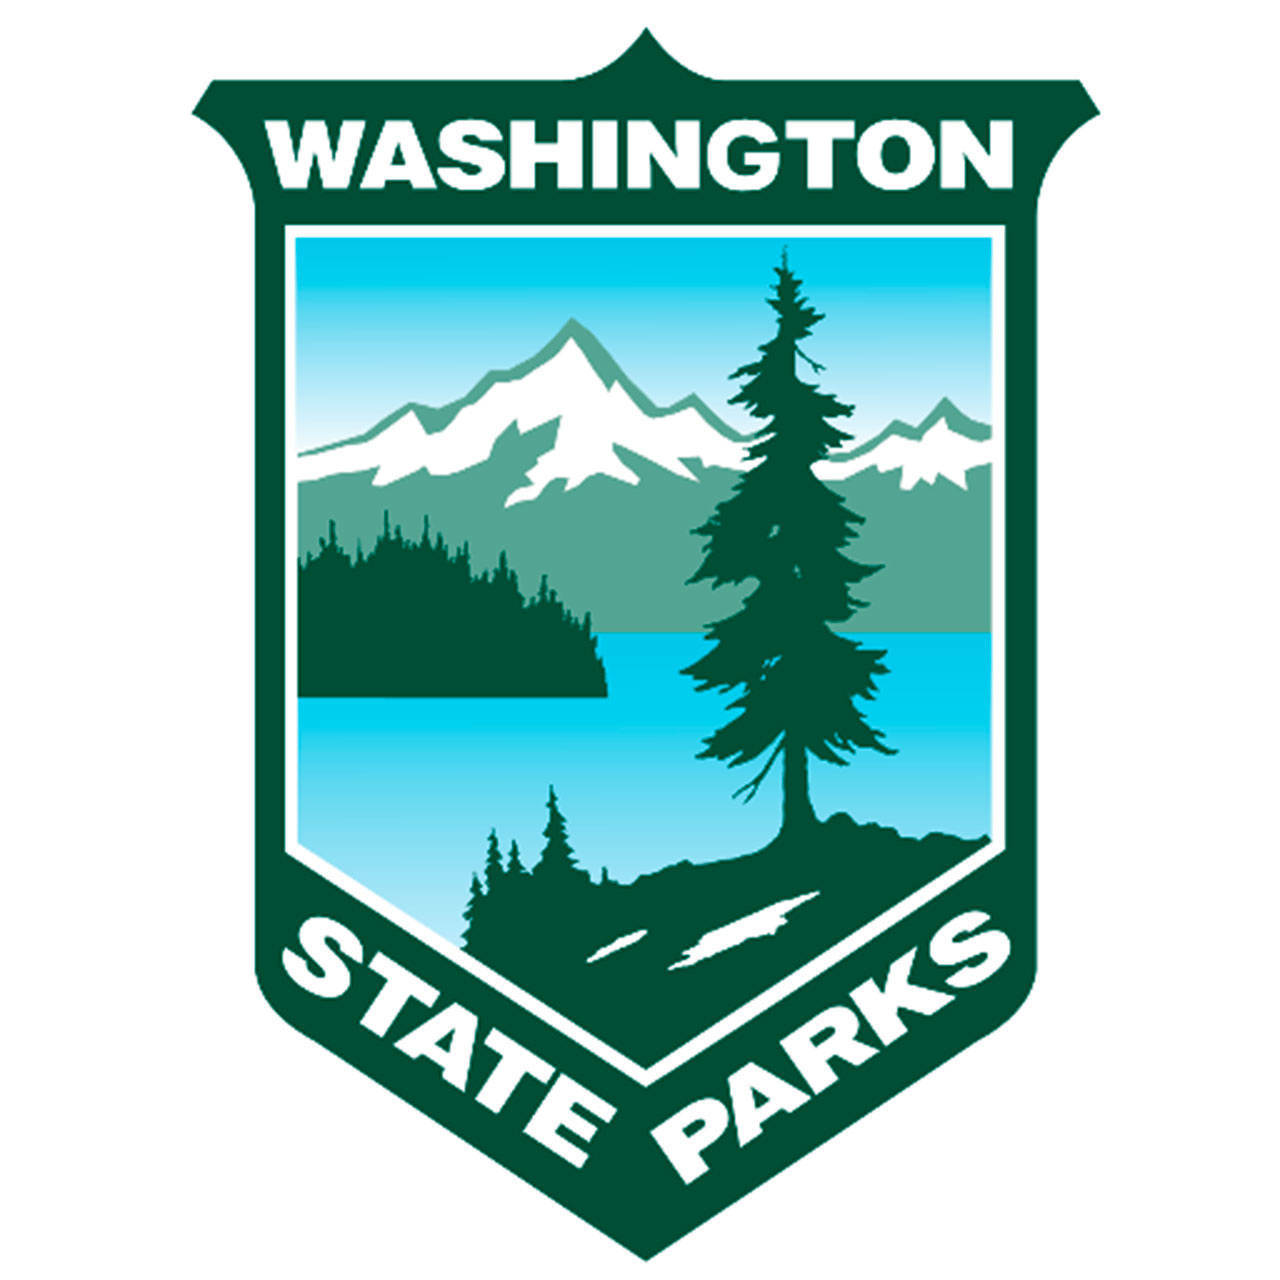 Next State Parks ‘free day’ is Aug. 25